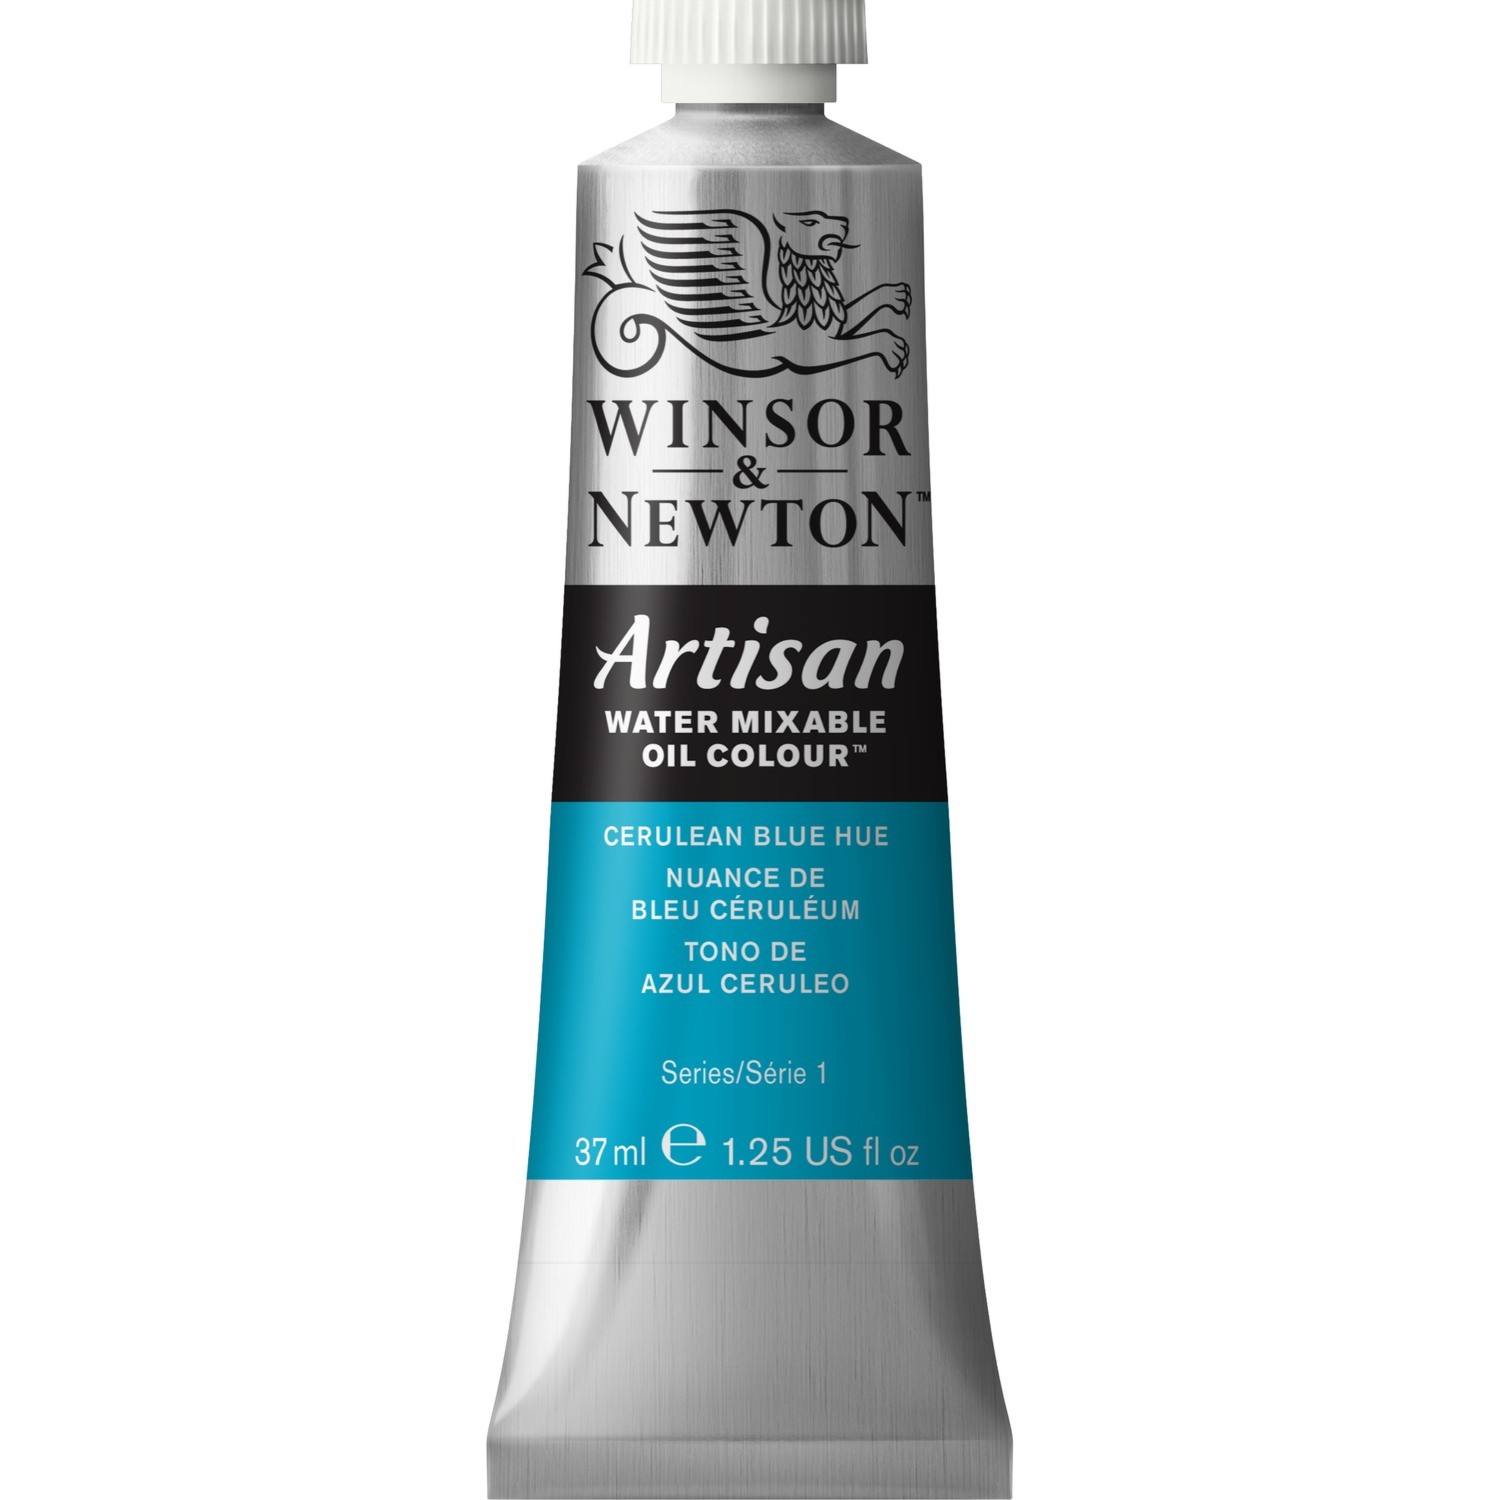 Winsor and Newton 37ml Artisan Mixable Oil Paint - Cerulean Blue Hue Image 1